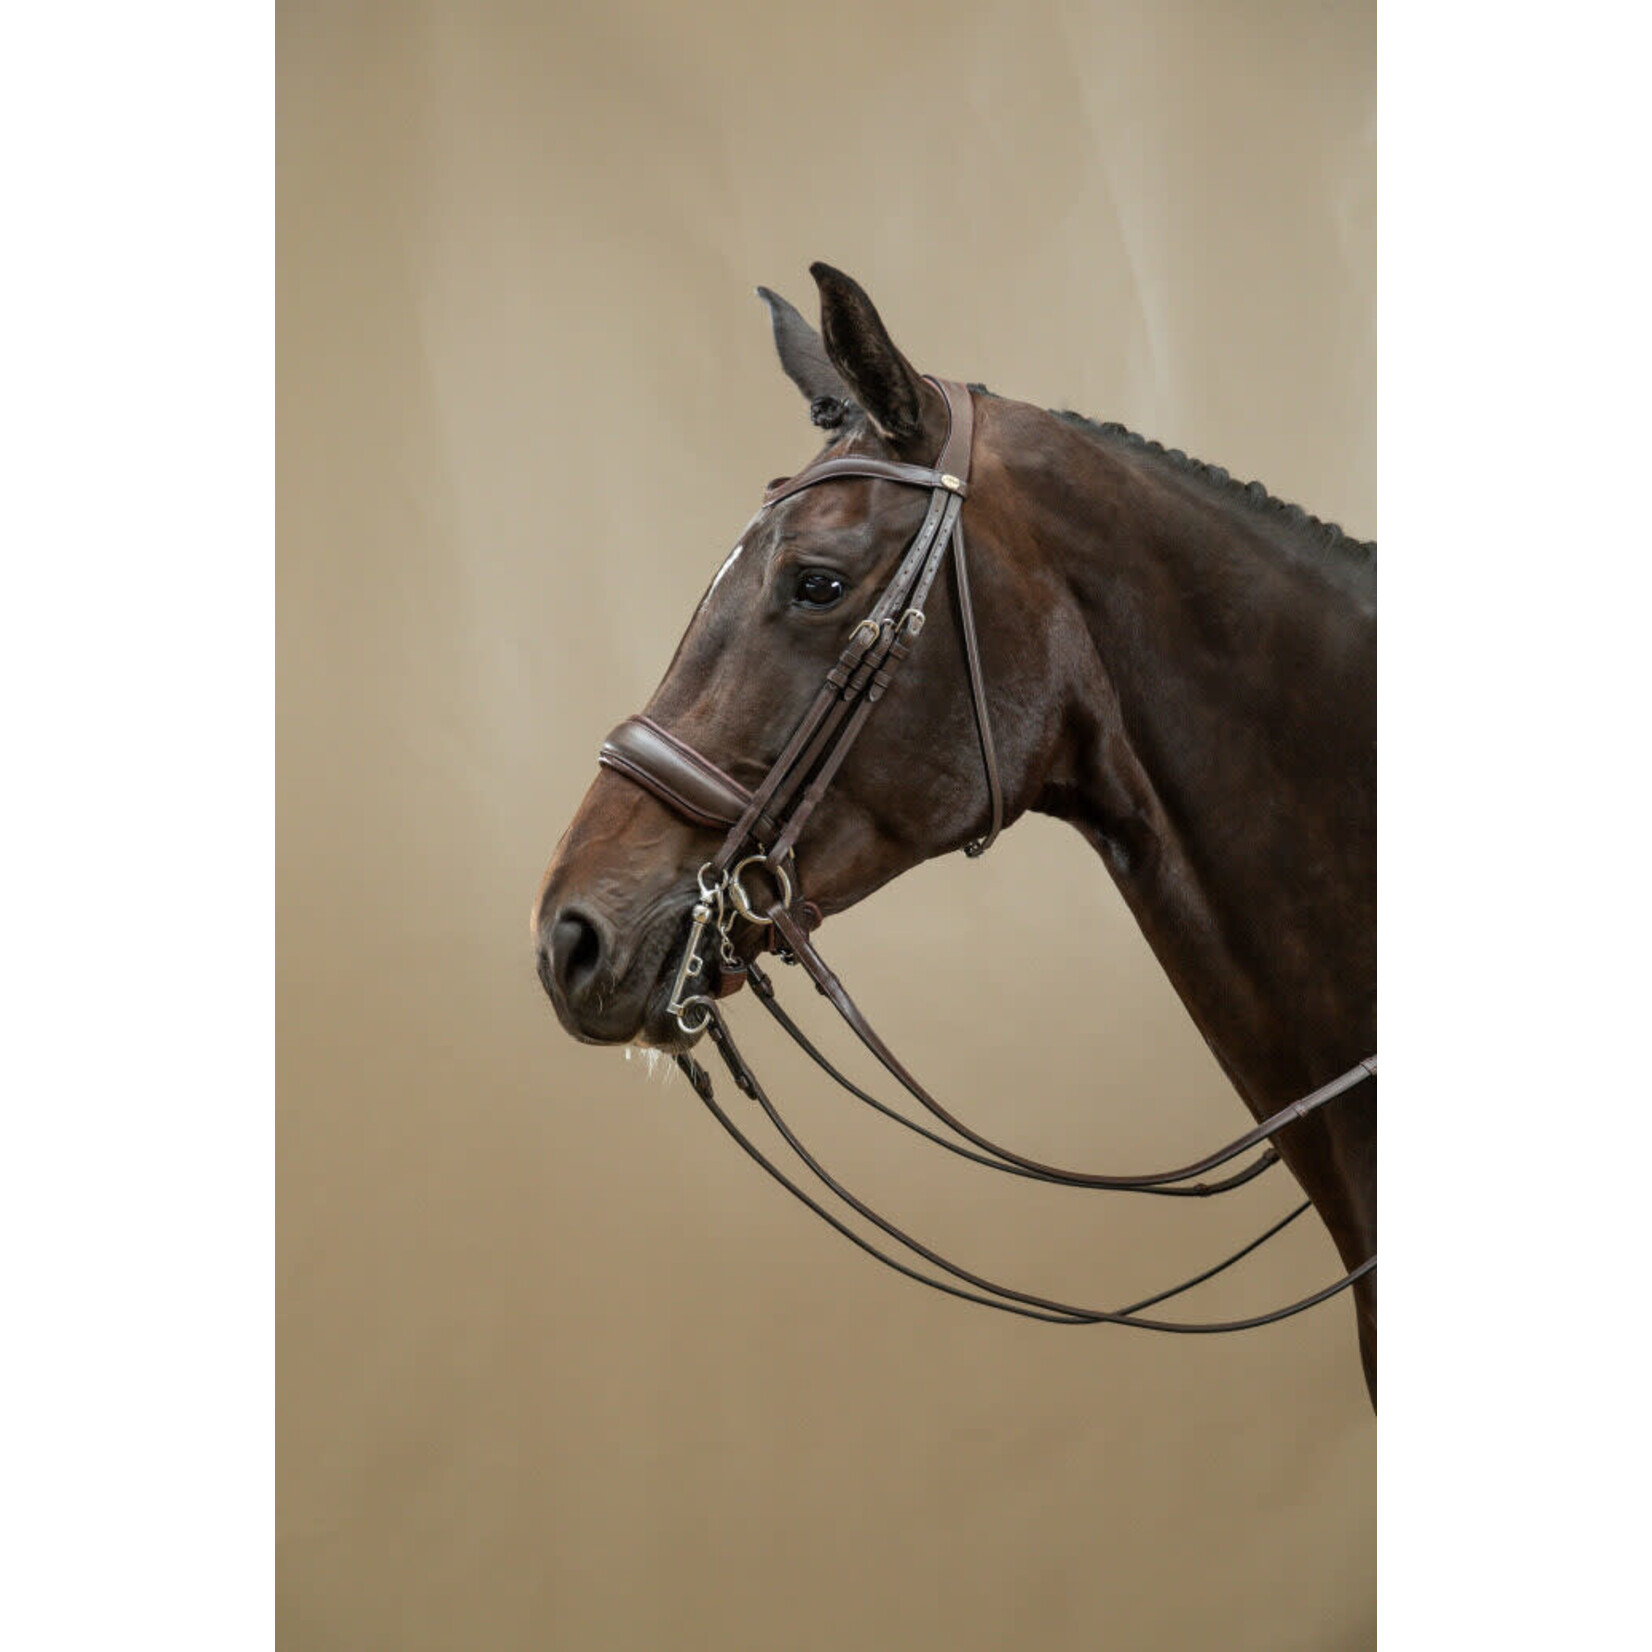 Dy'on B168 Dy’on Working Collection Classic Crank Noseband Bridle